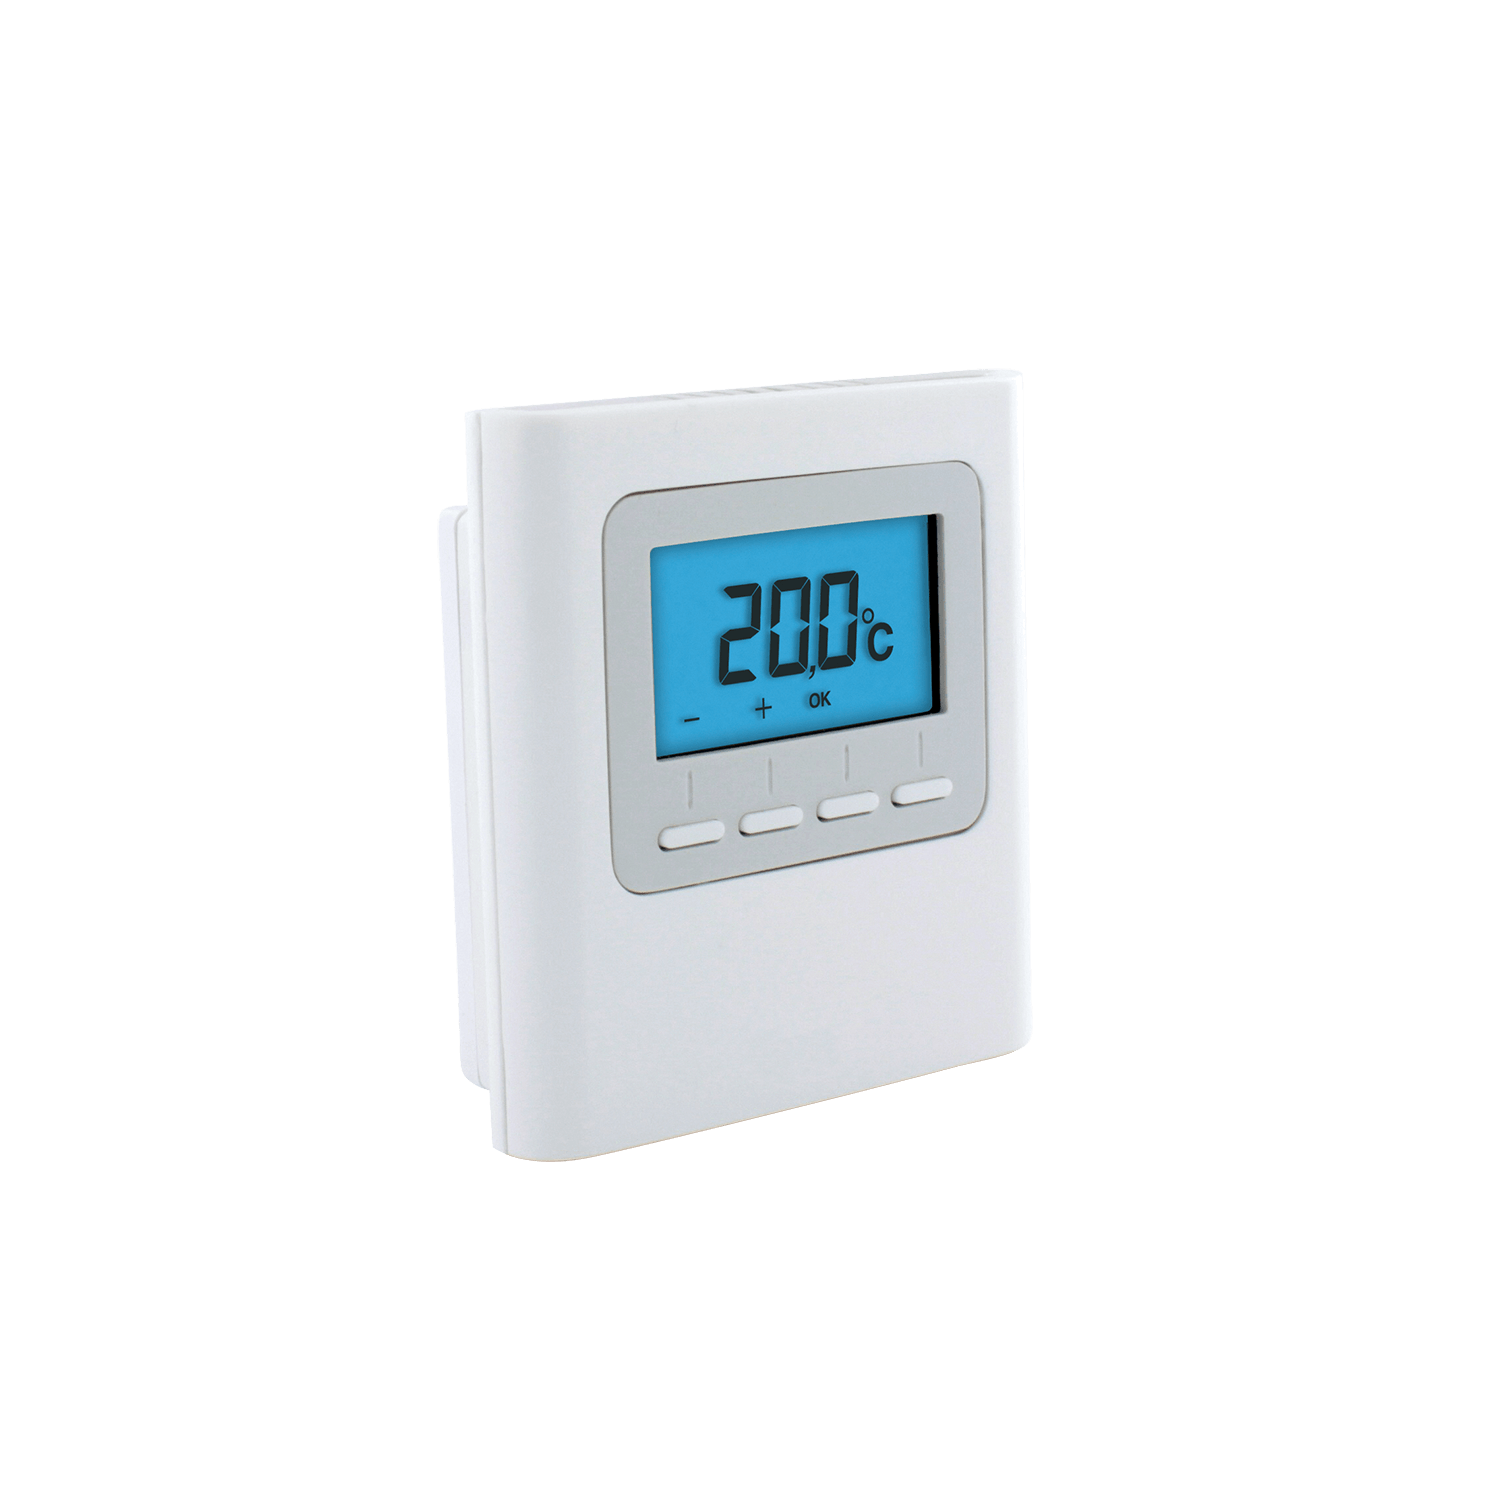  X3D easy room thermostat for Aeroflow electrical heating